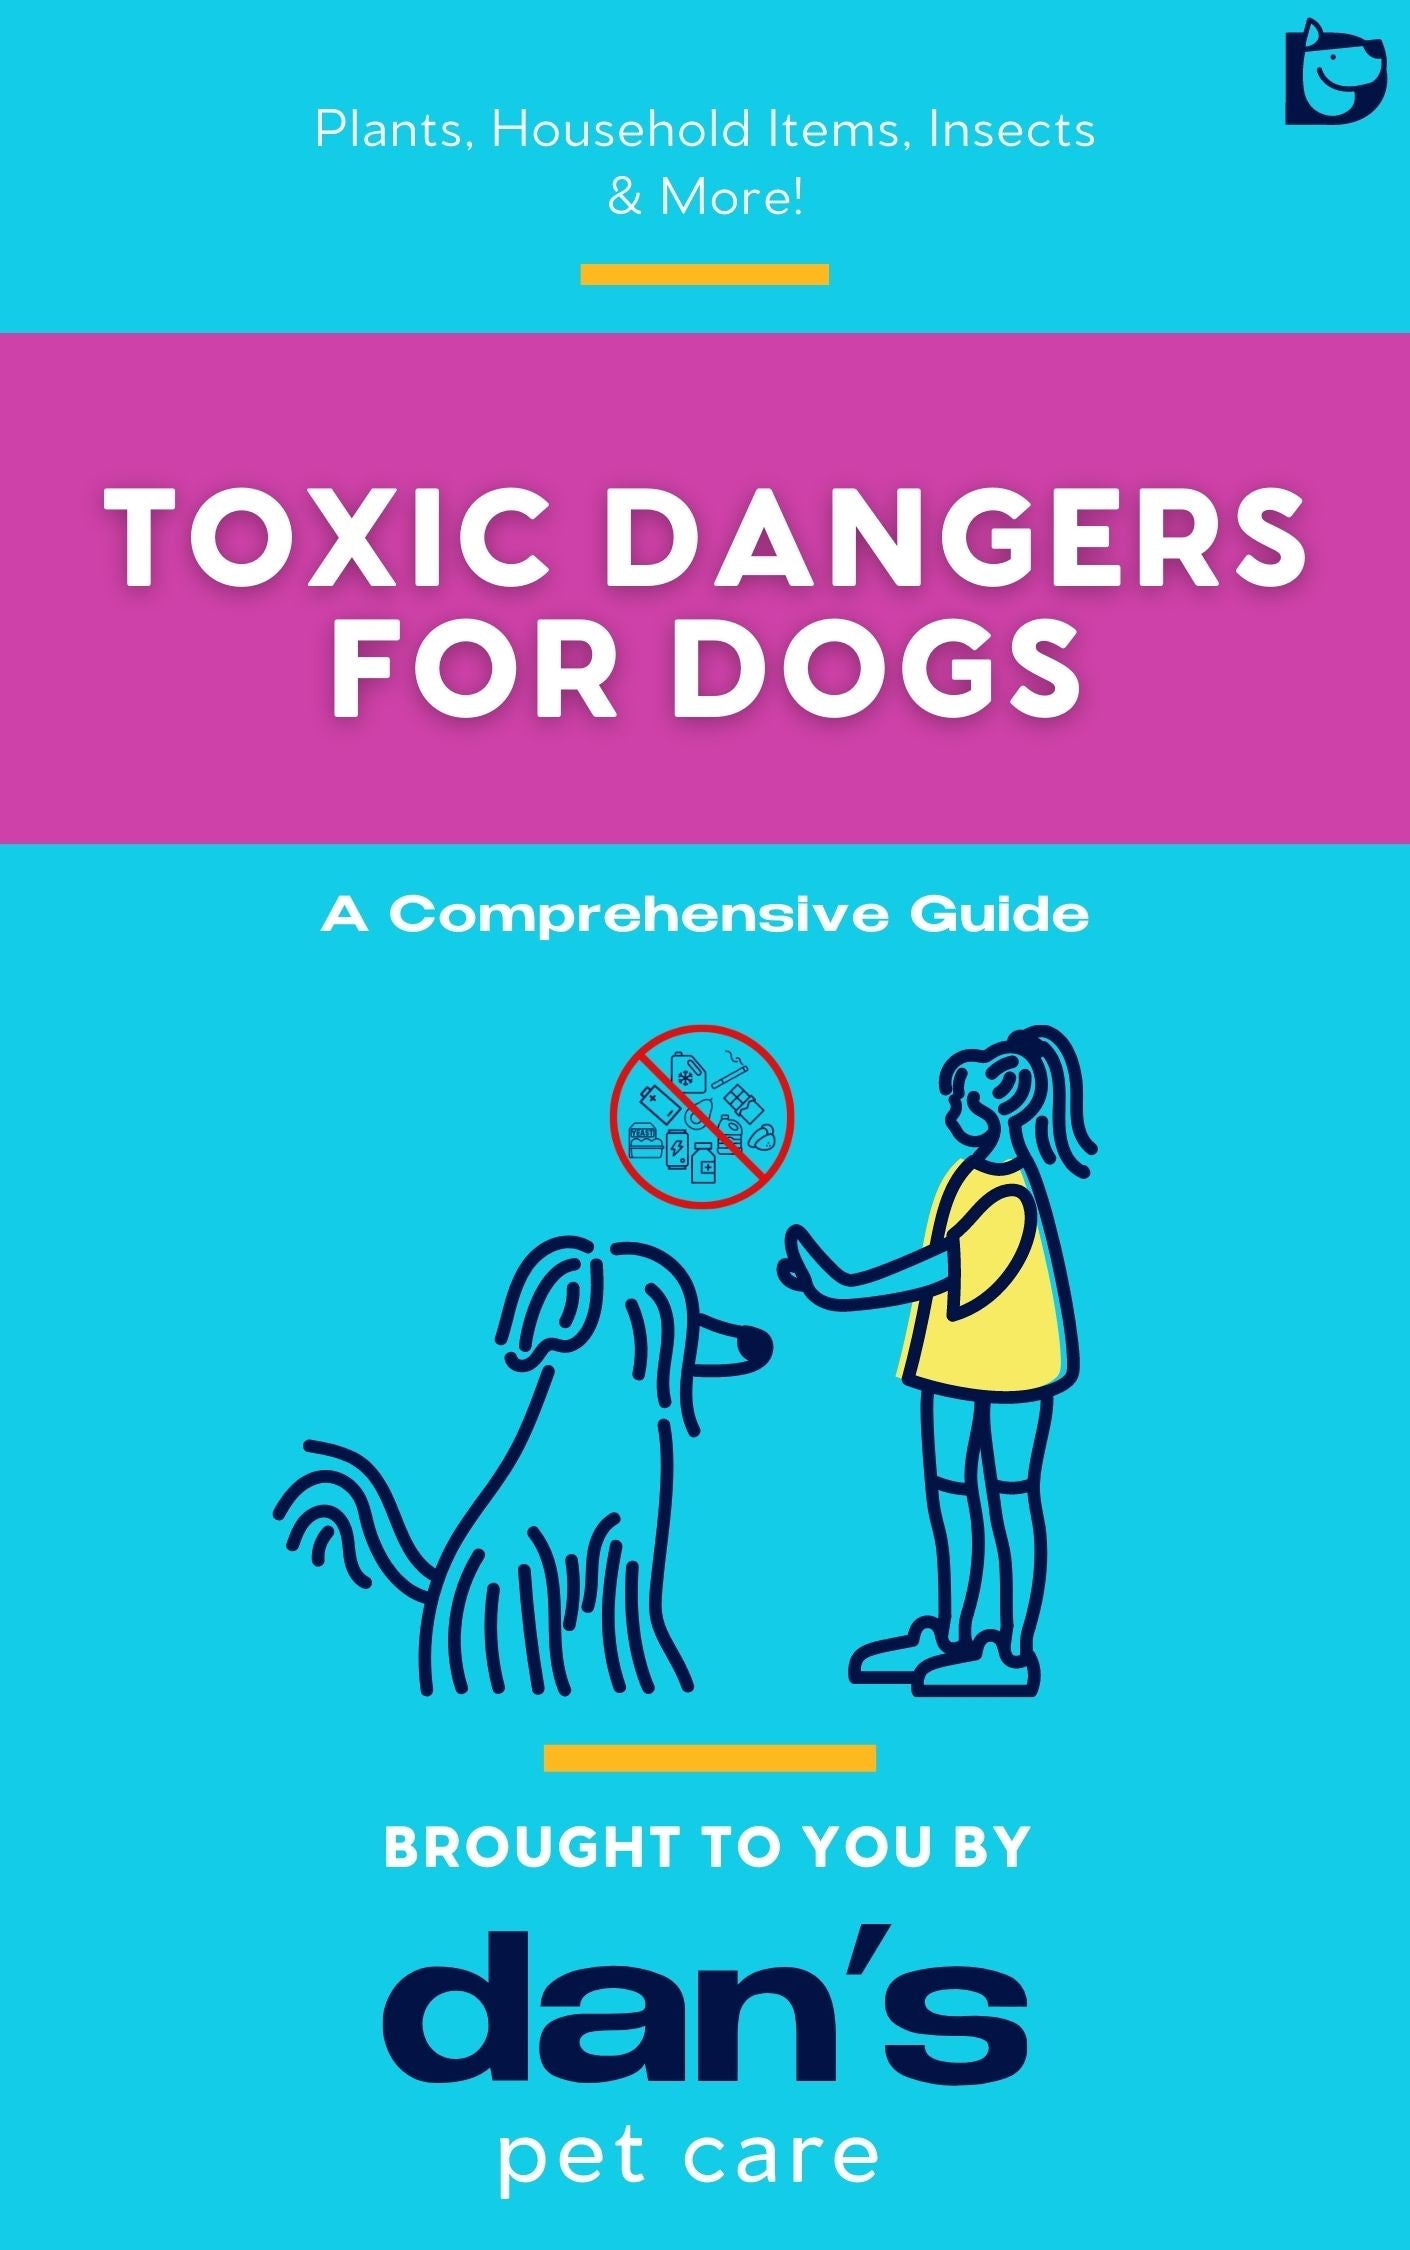 Toxic Dangers for Dogs